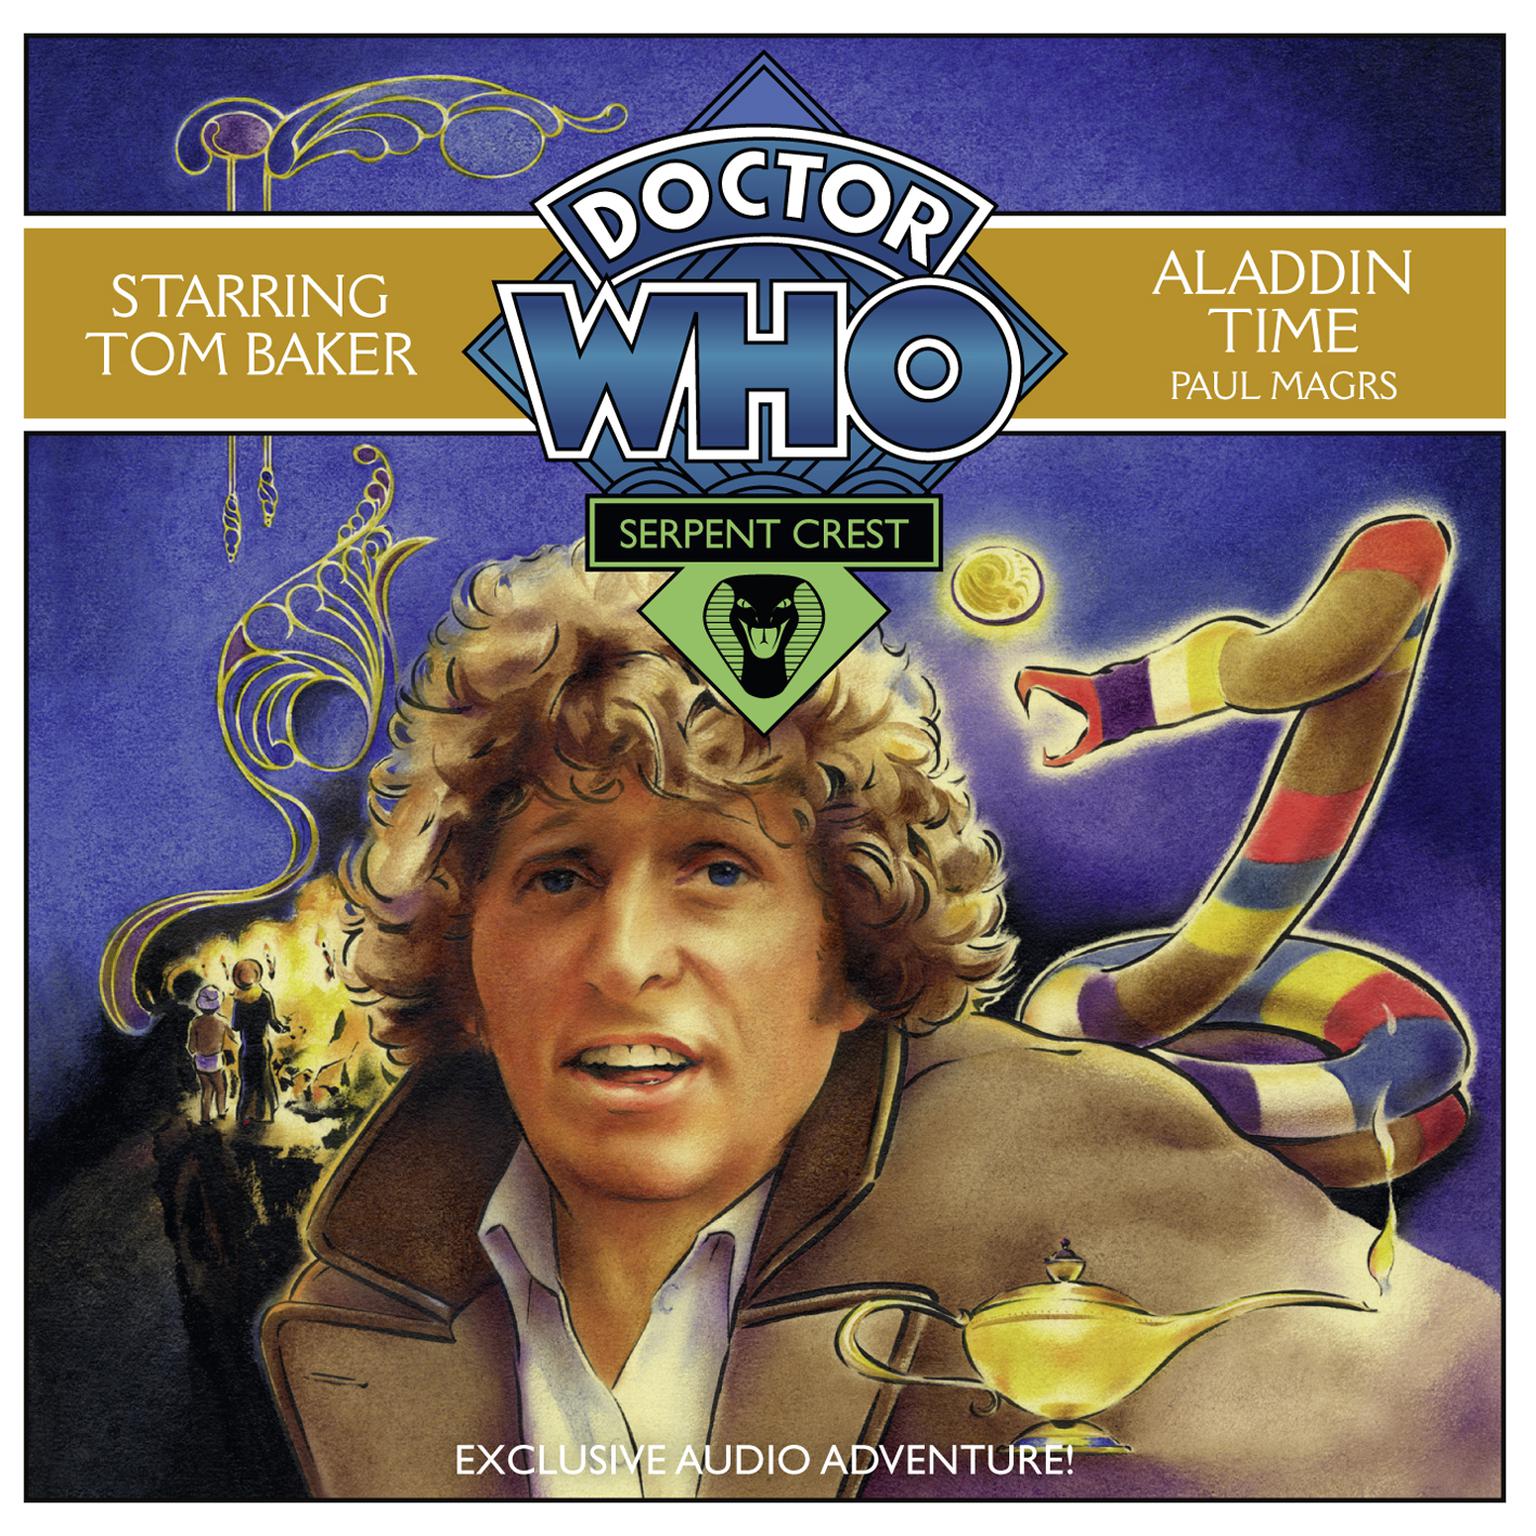 Doctor Who: Aladdin Time Audiobook, by Paul Magrs